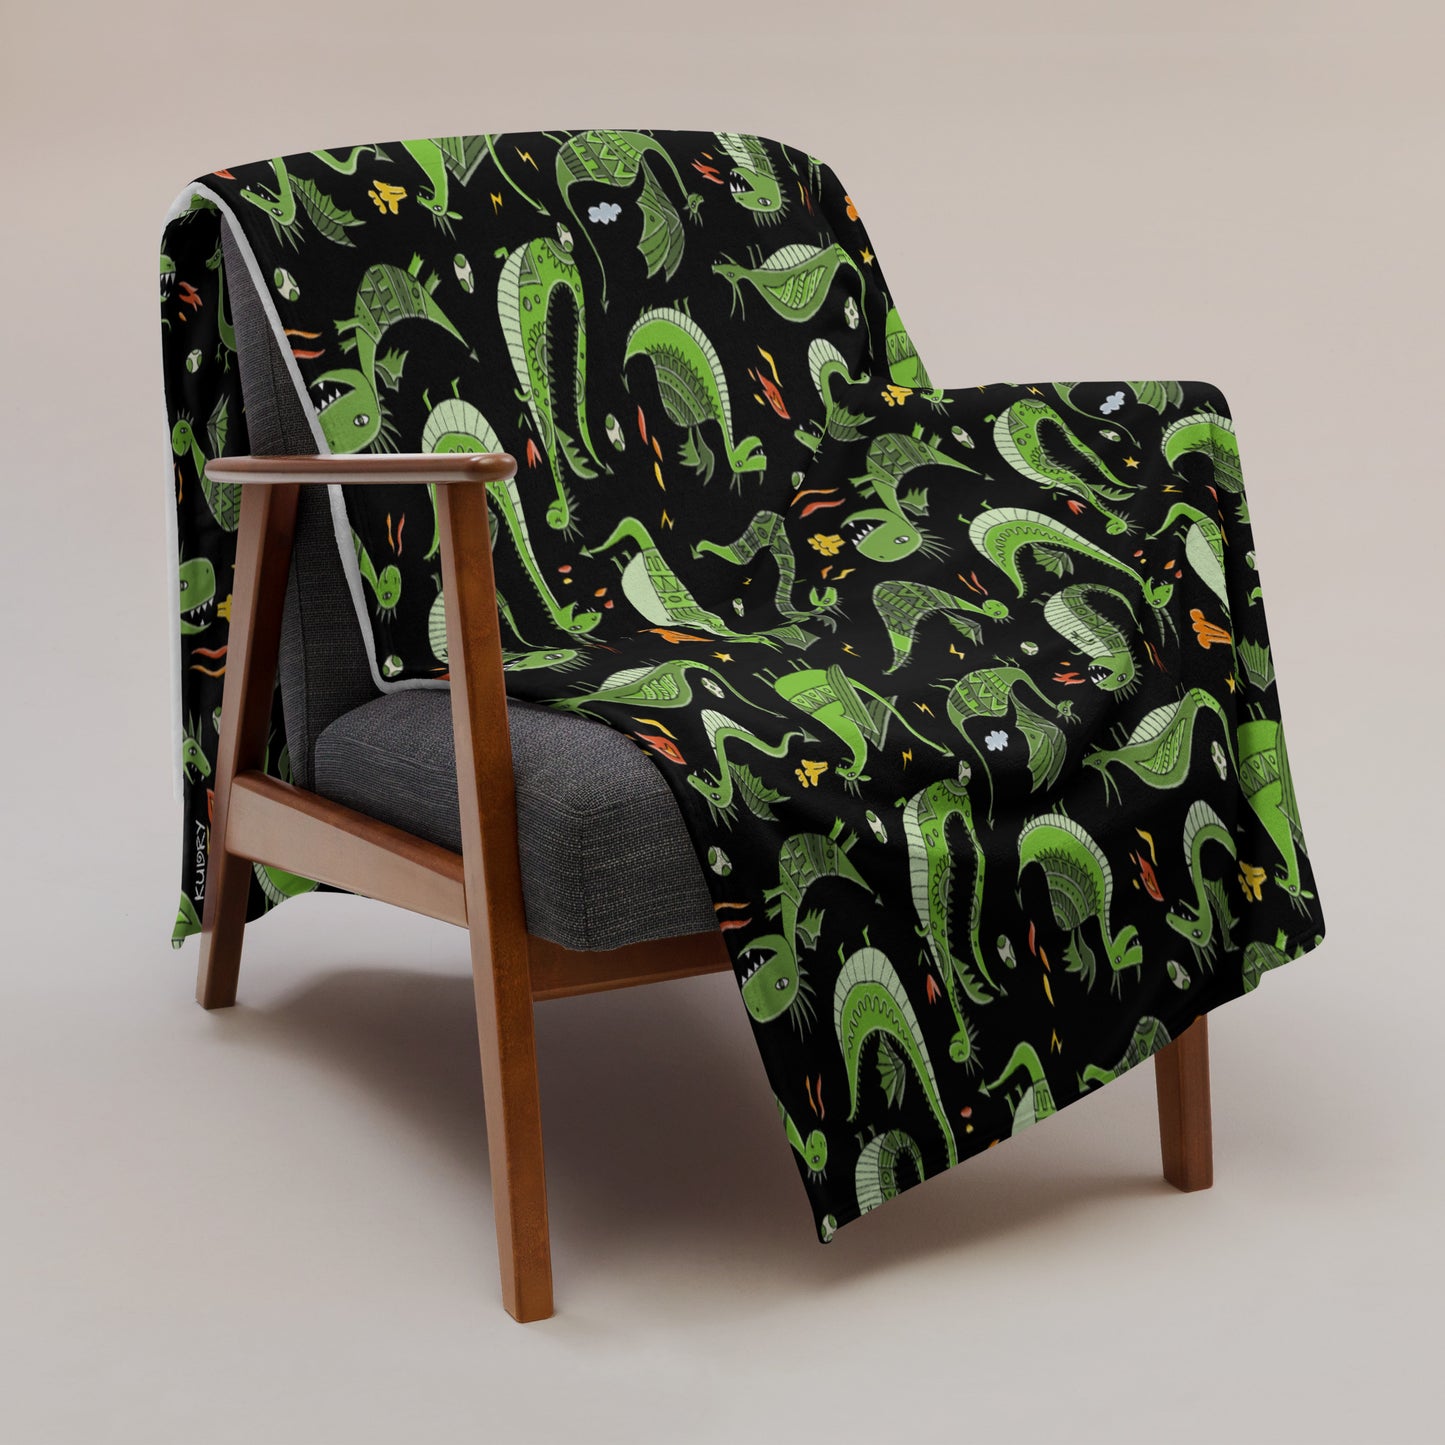 Black blanket 60х80 with funny green dragons on chair